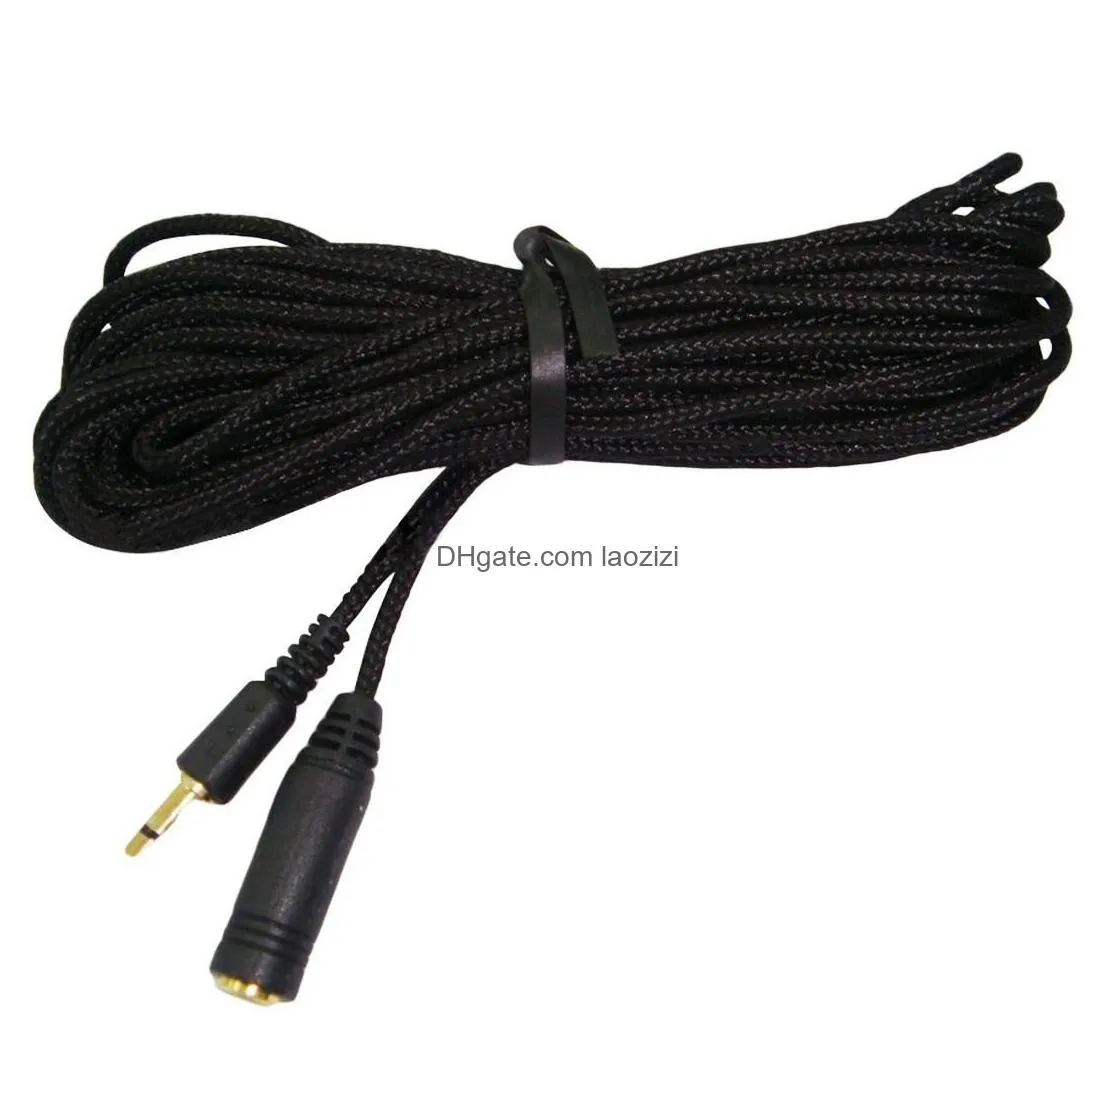 3.5mm stereo audio earphone extension cable 5m//1.5m ultra long for headphone computer cellphone mp3/4